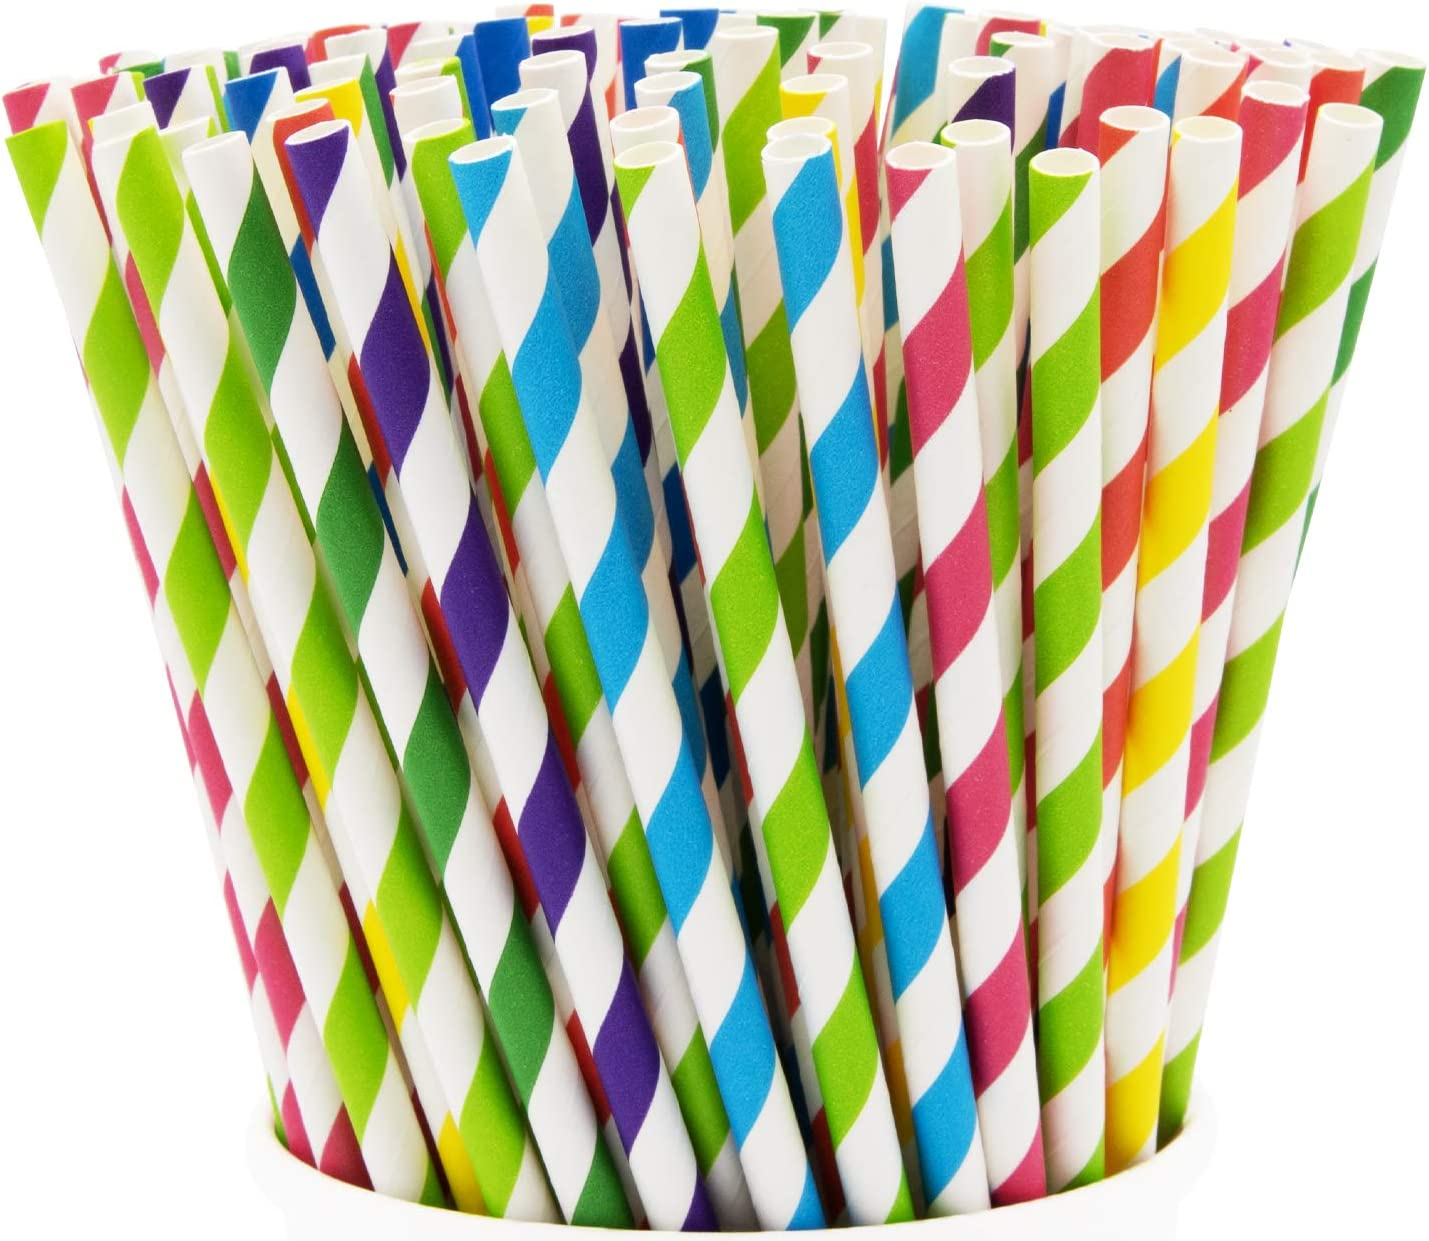 Striped festive colored paper drinking straws